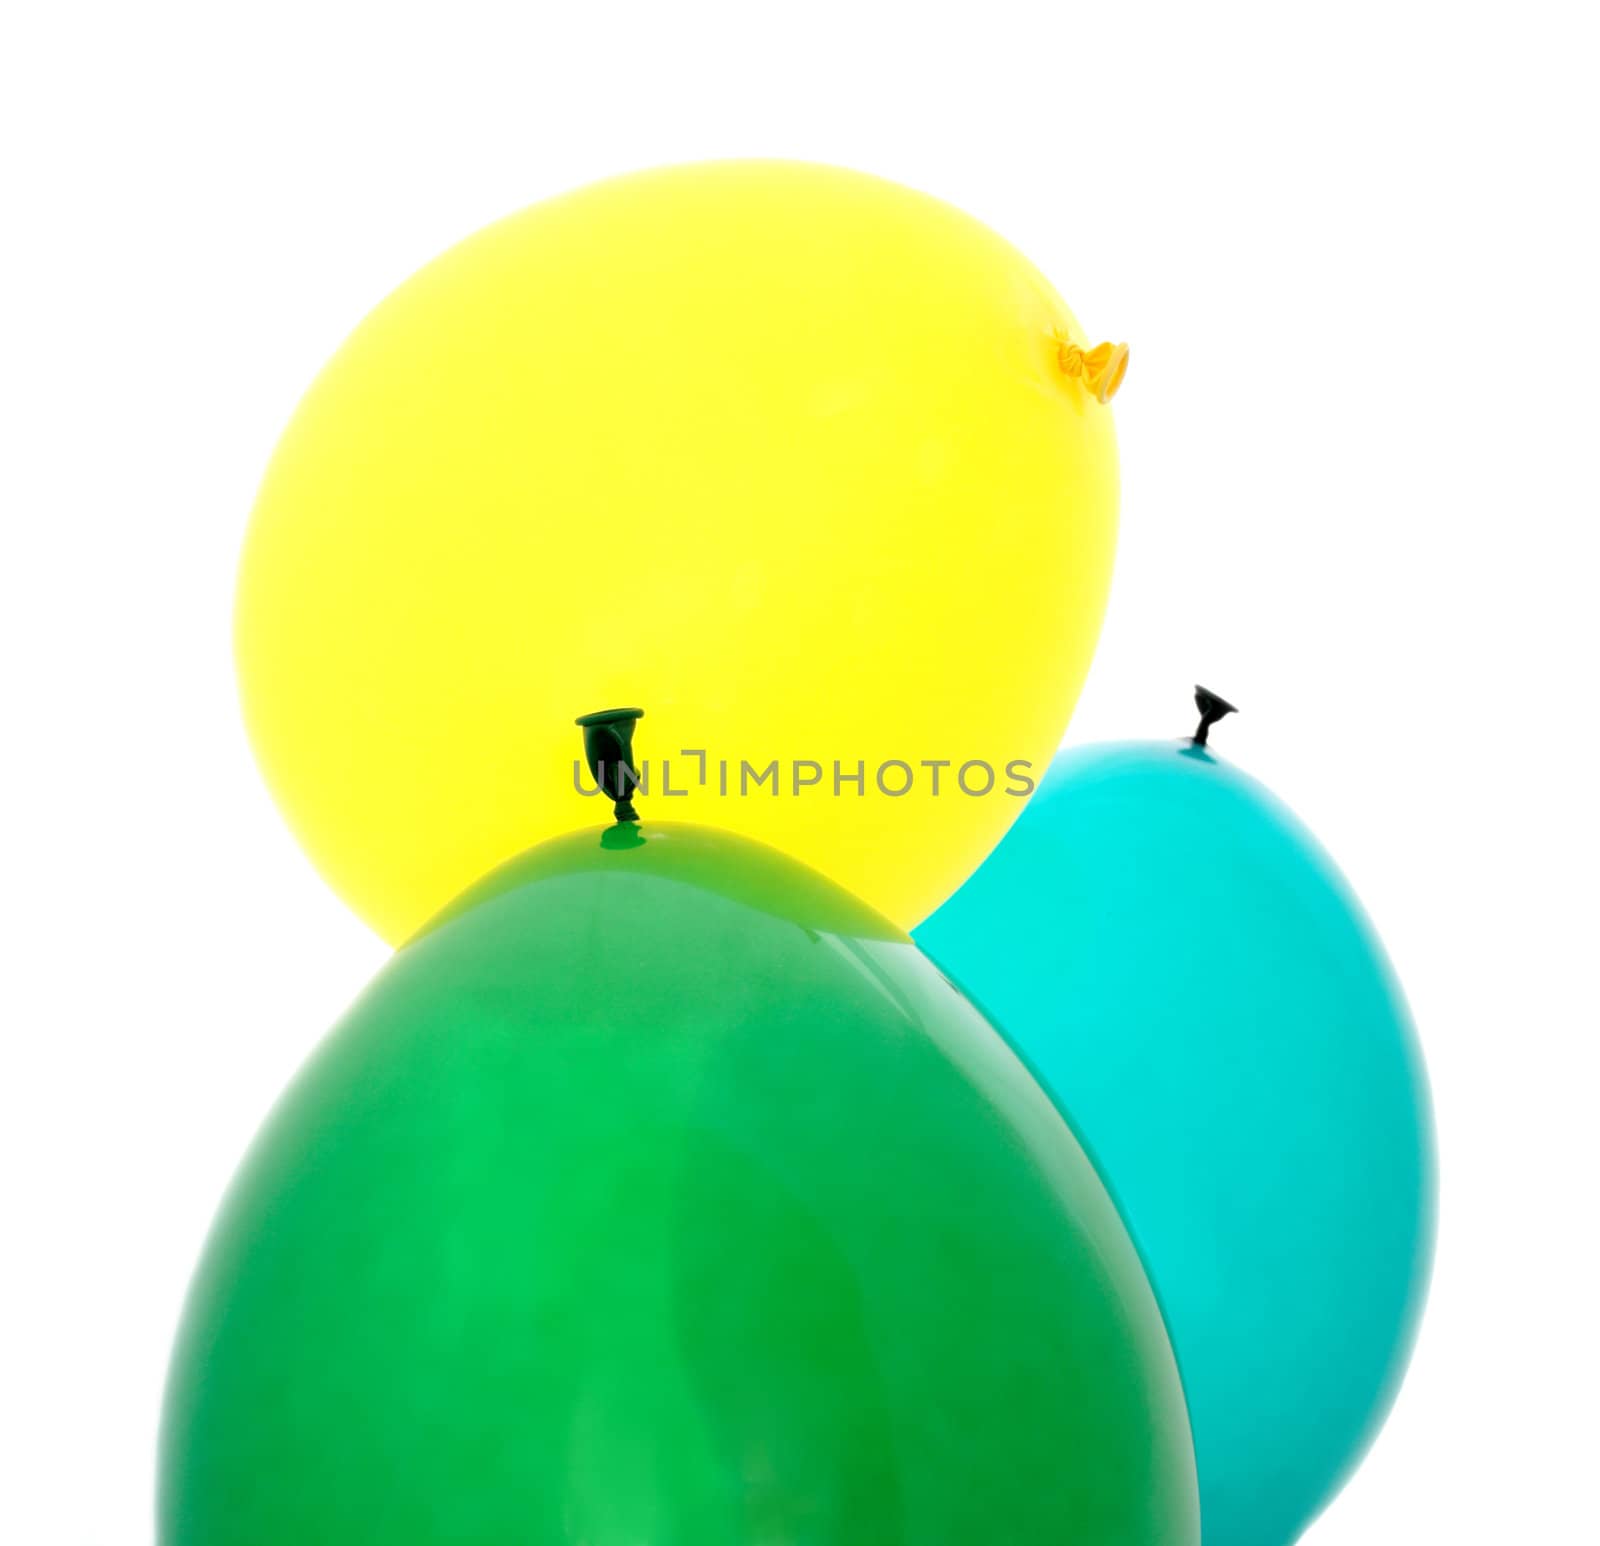 yellow, green and blue balloons isolated on white